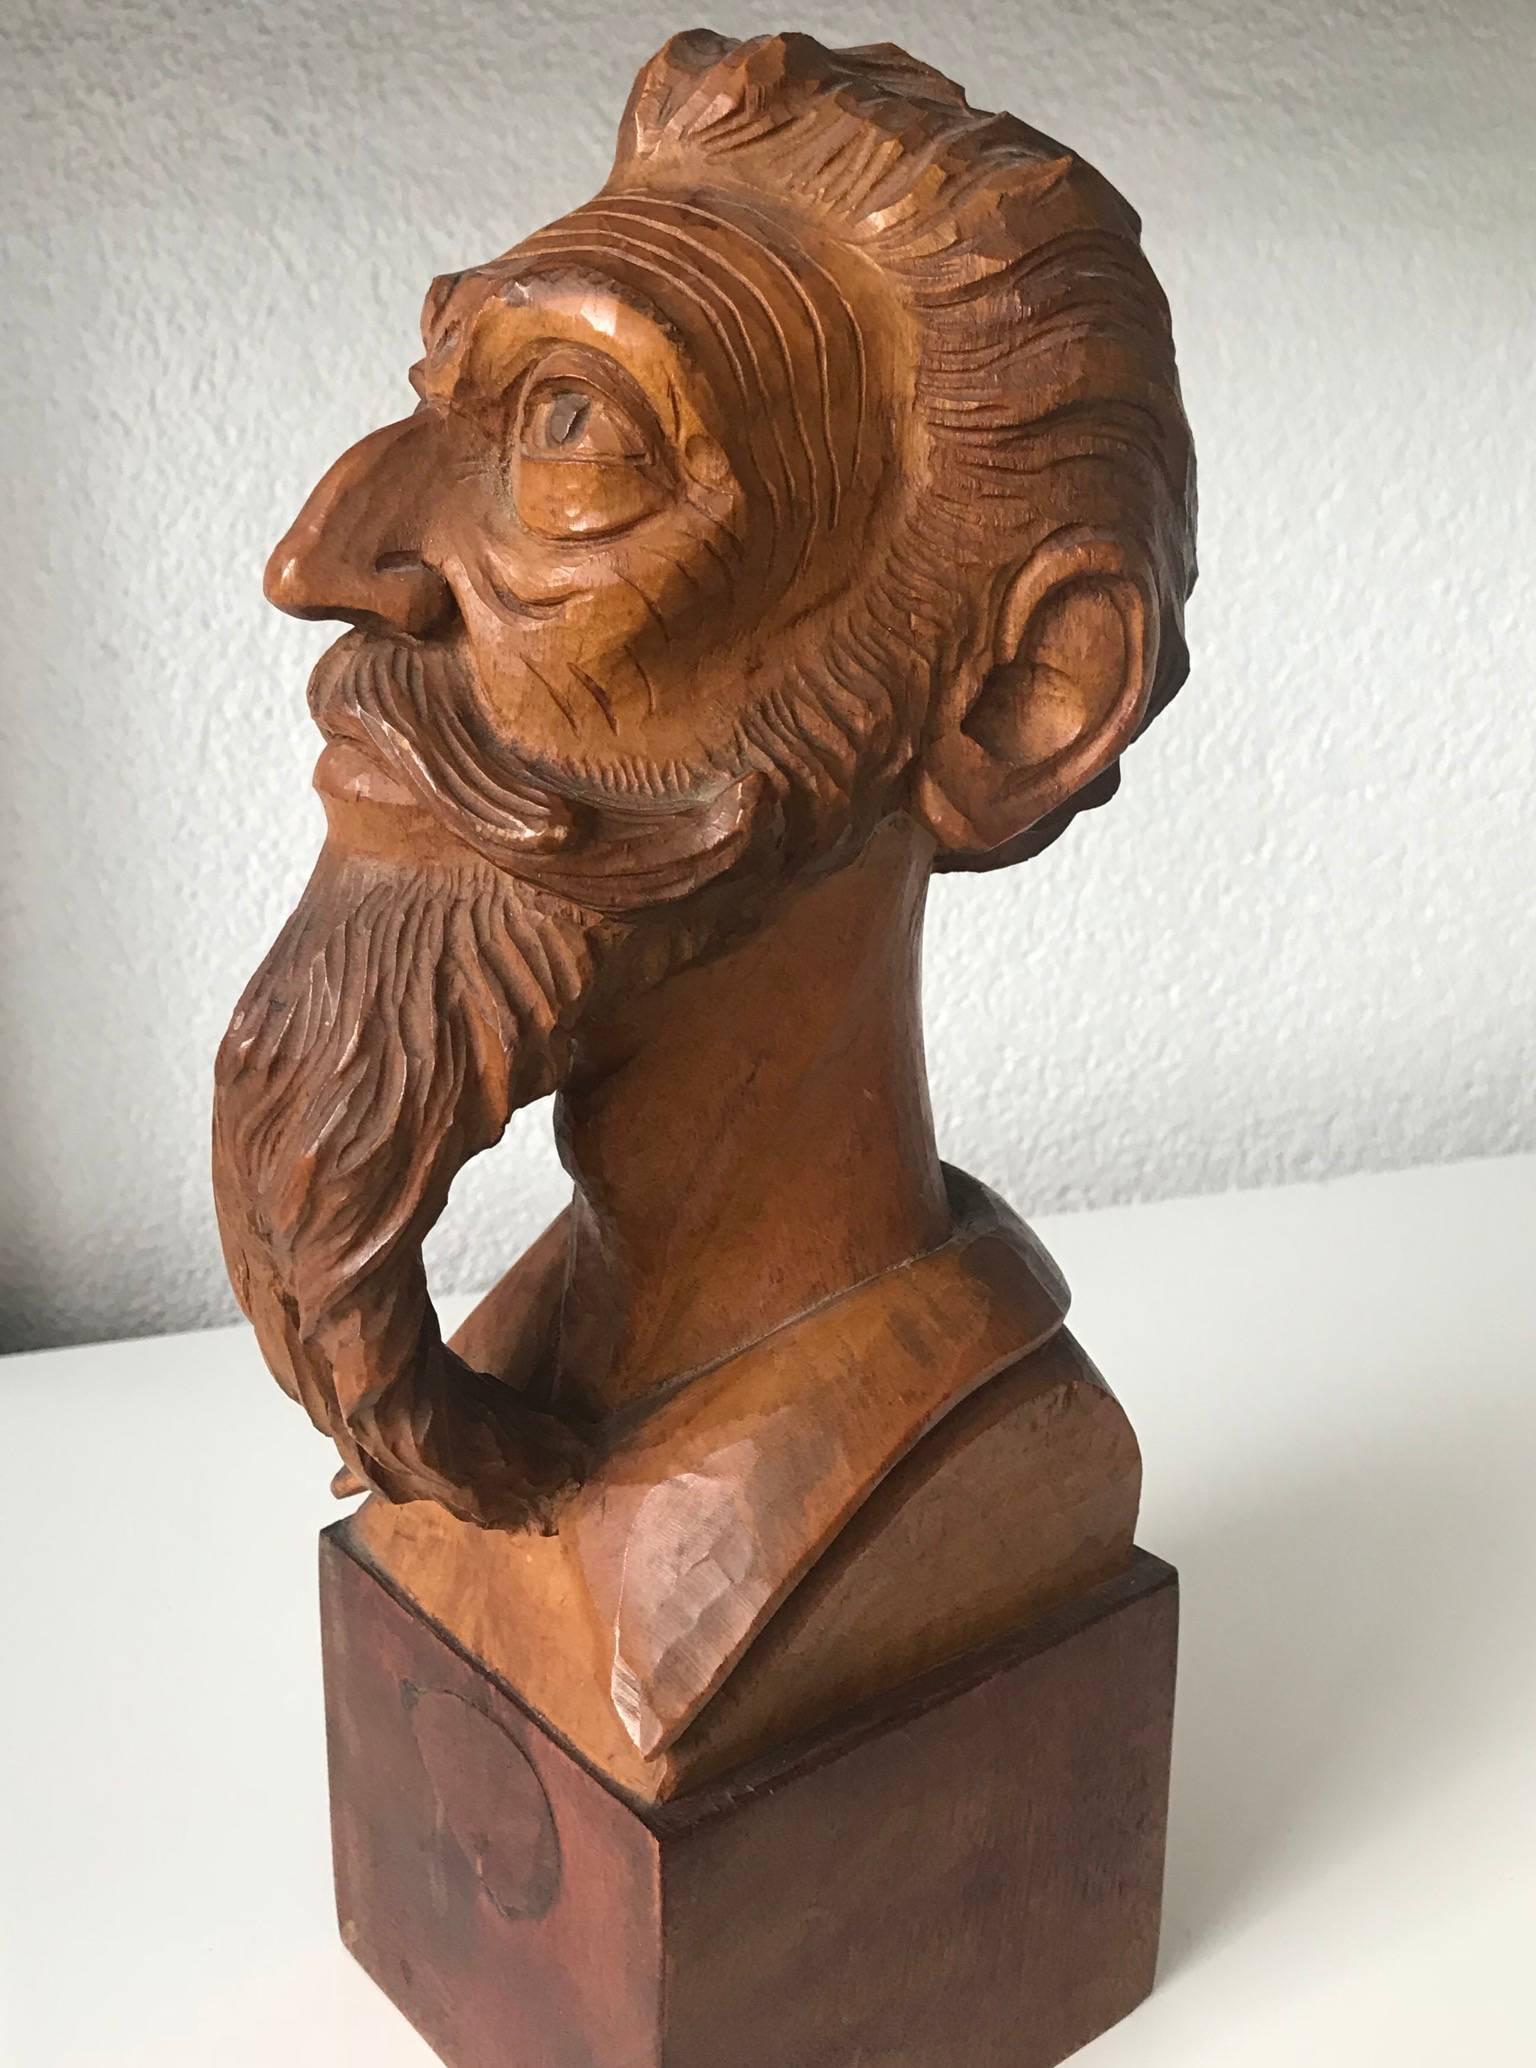 Hand-carved character head of Don Quixote.

For the collectors and enthusiasts of historical novels and their main characters, we also have this wonderful and all handcrafted bust of Don Quixote. This rare sculpture is a joy to look at, because the